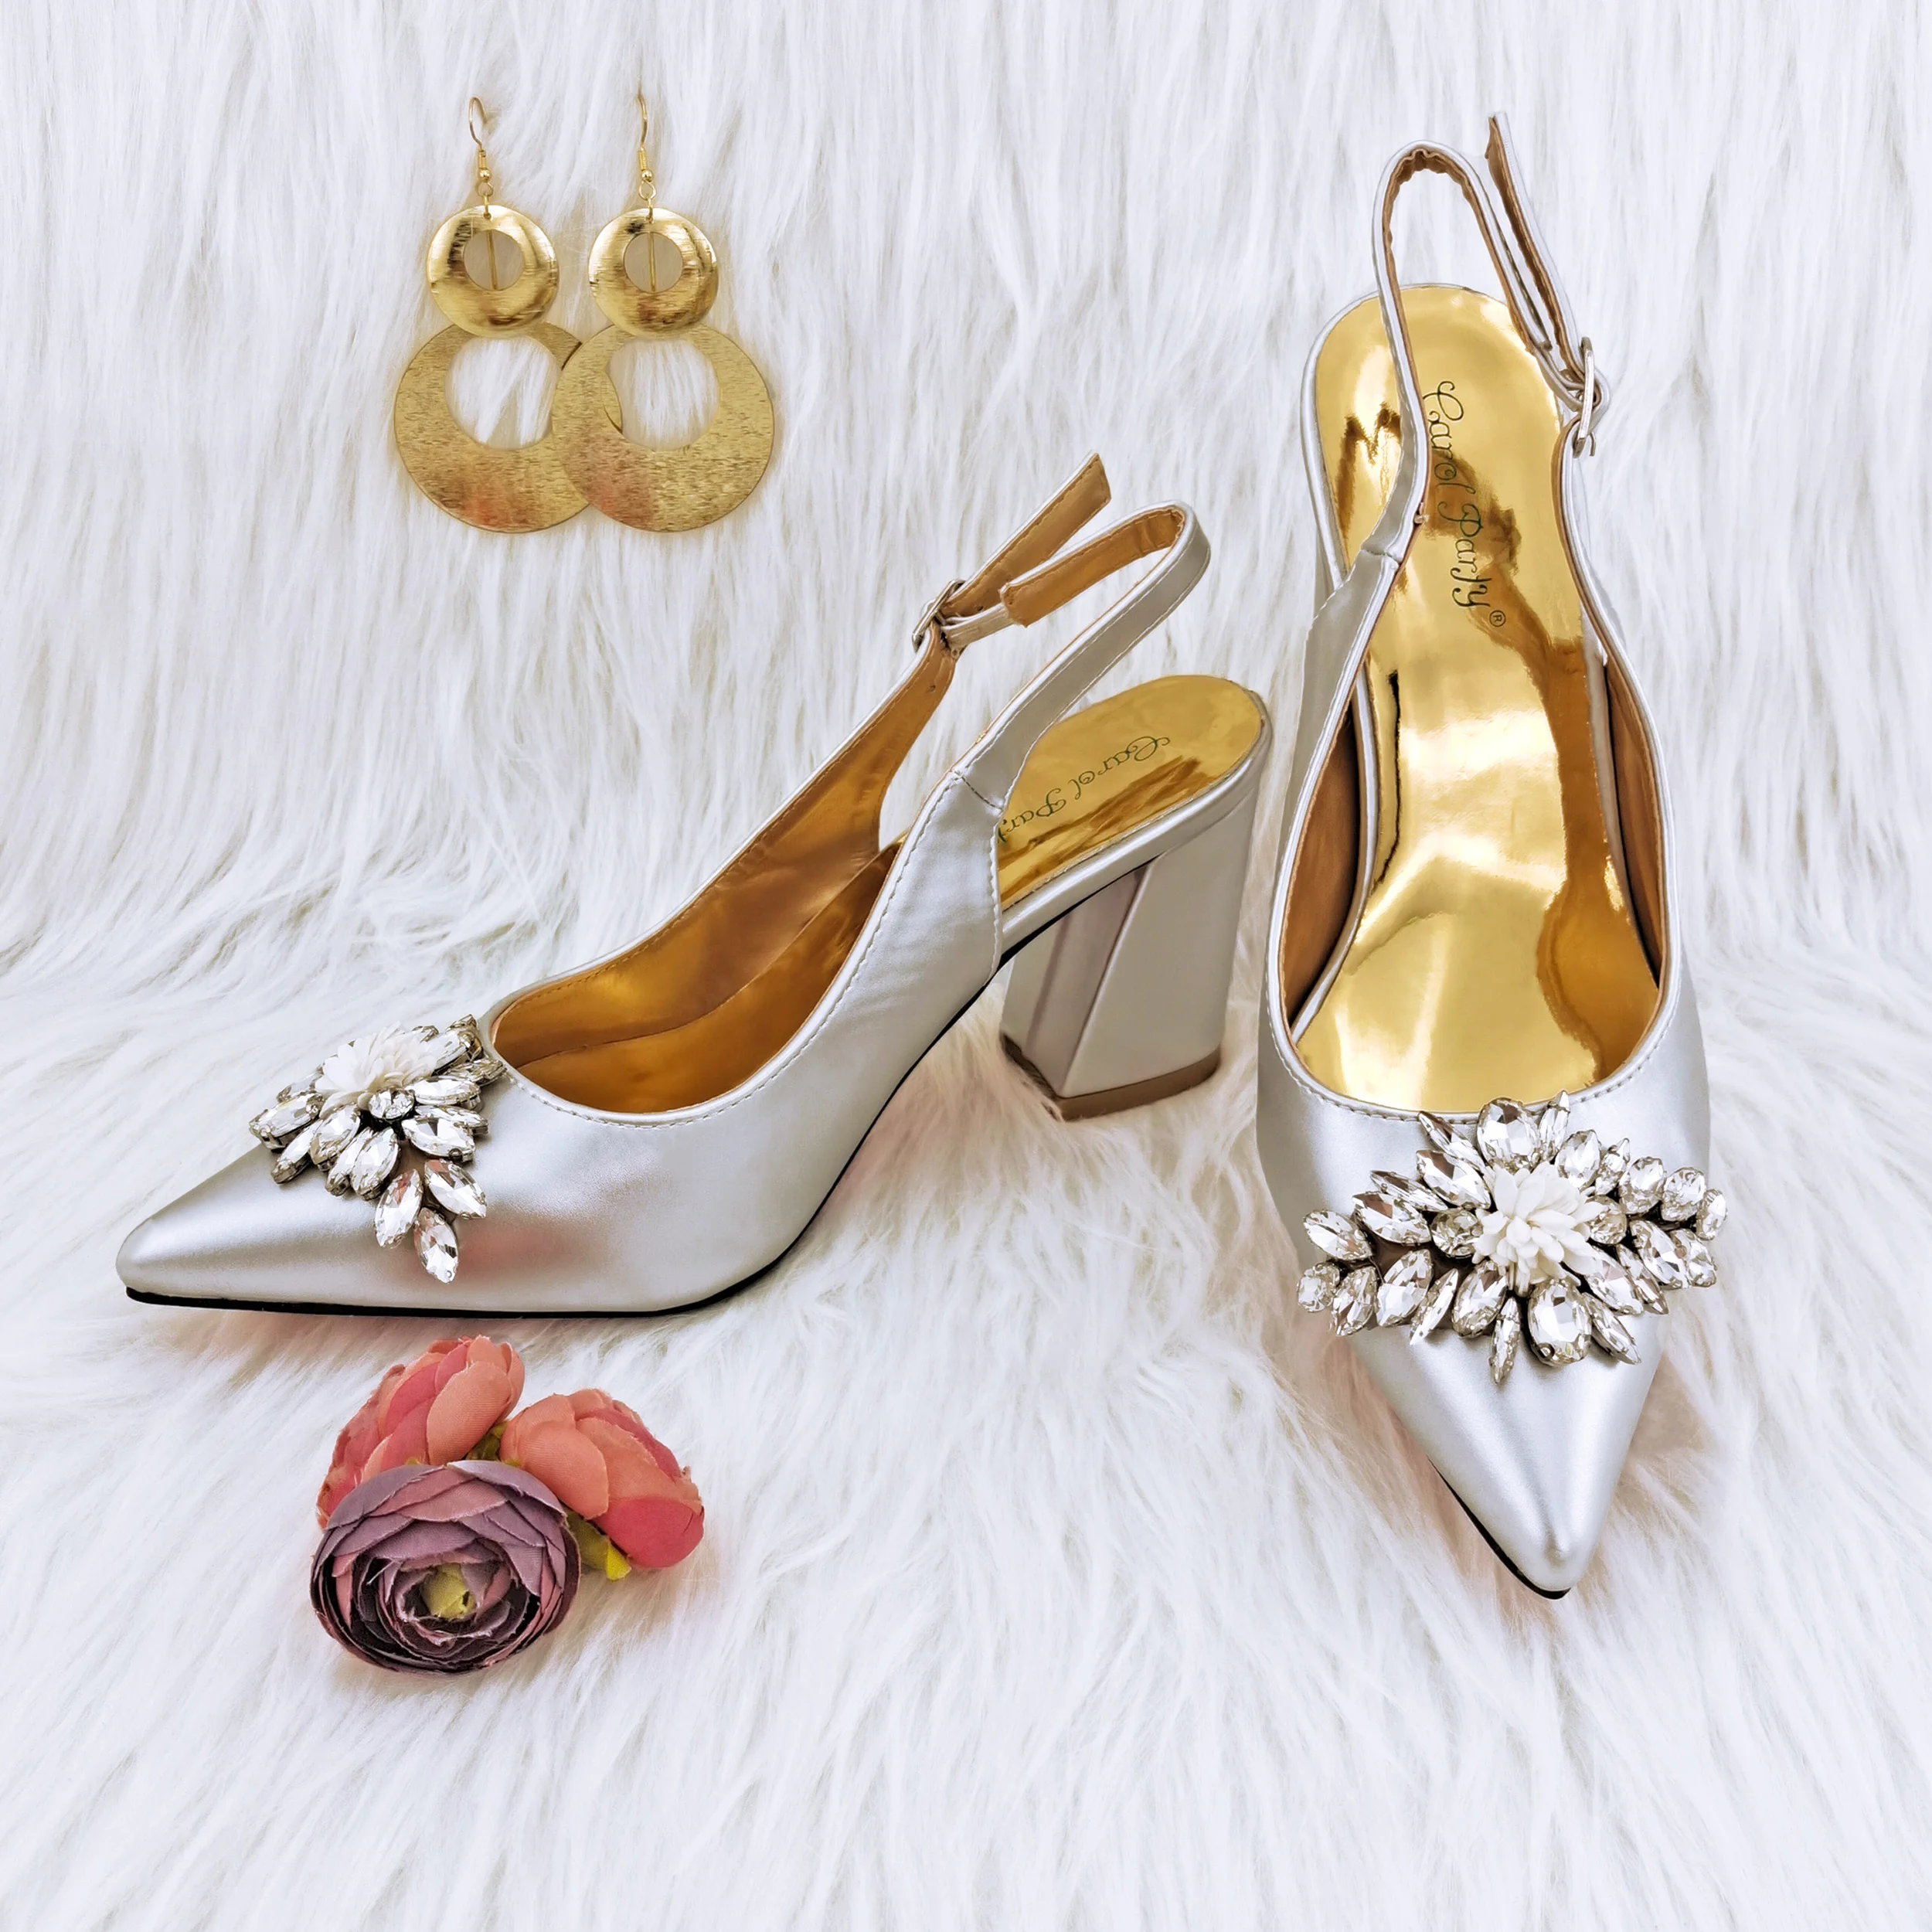 Golden New Arrivals Nigerian Women Matching Shoes and Bag Set Elegant Style  Italian Ladies Party Sandals with Shinning Crystal - AliExpress